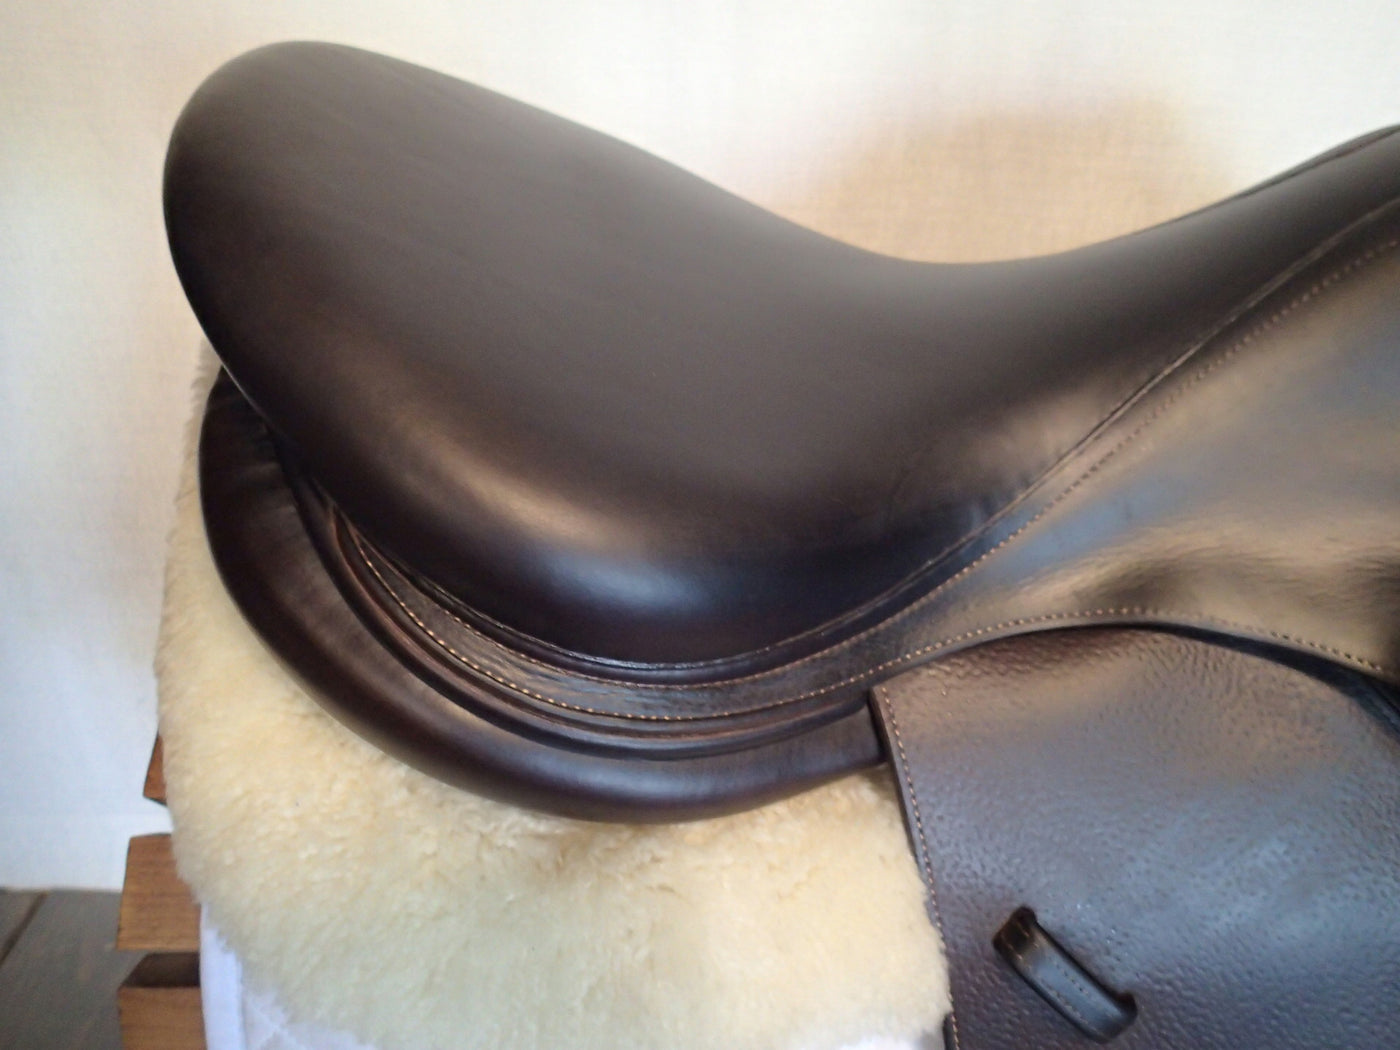 17.5" Voltaire Palm Beach Saddle - 2015 - 4A Flaps - 4.75" dot to dot - Pro Panels